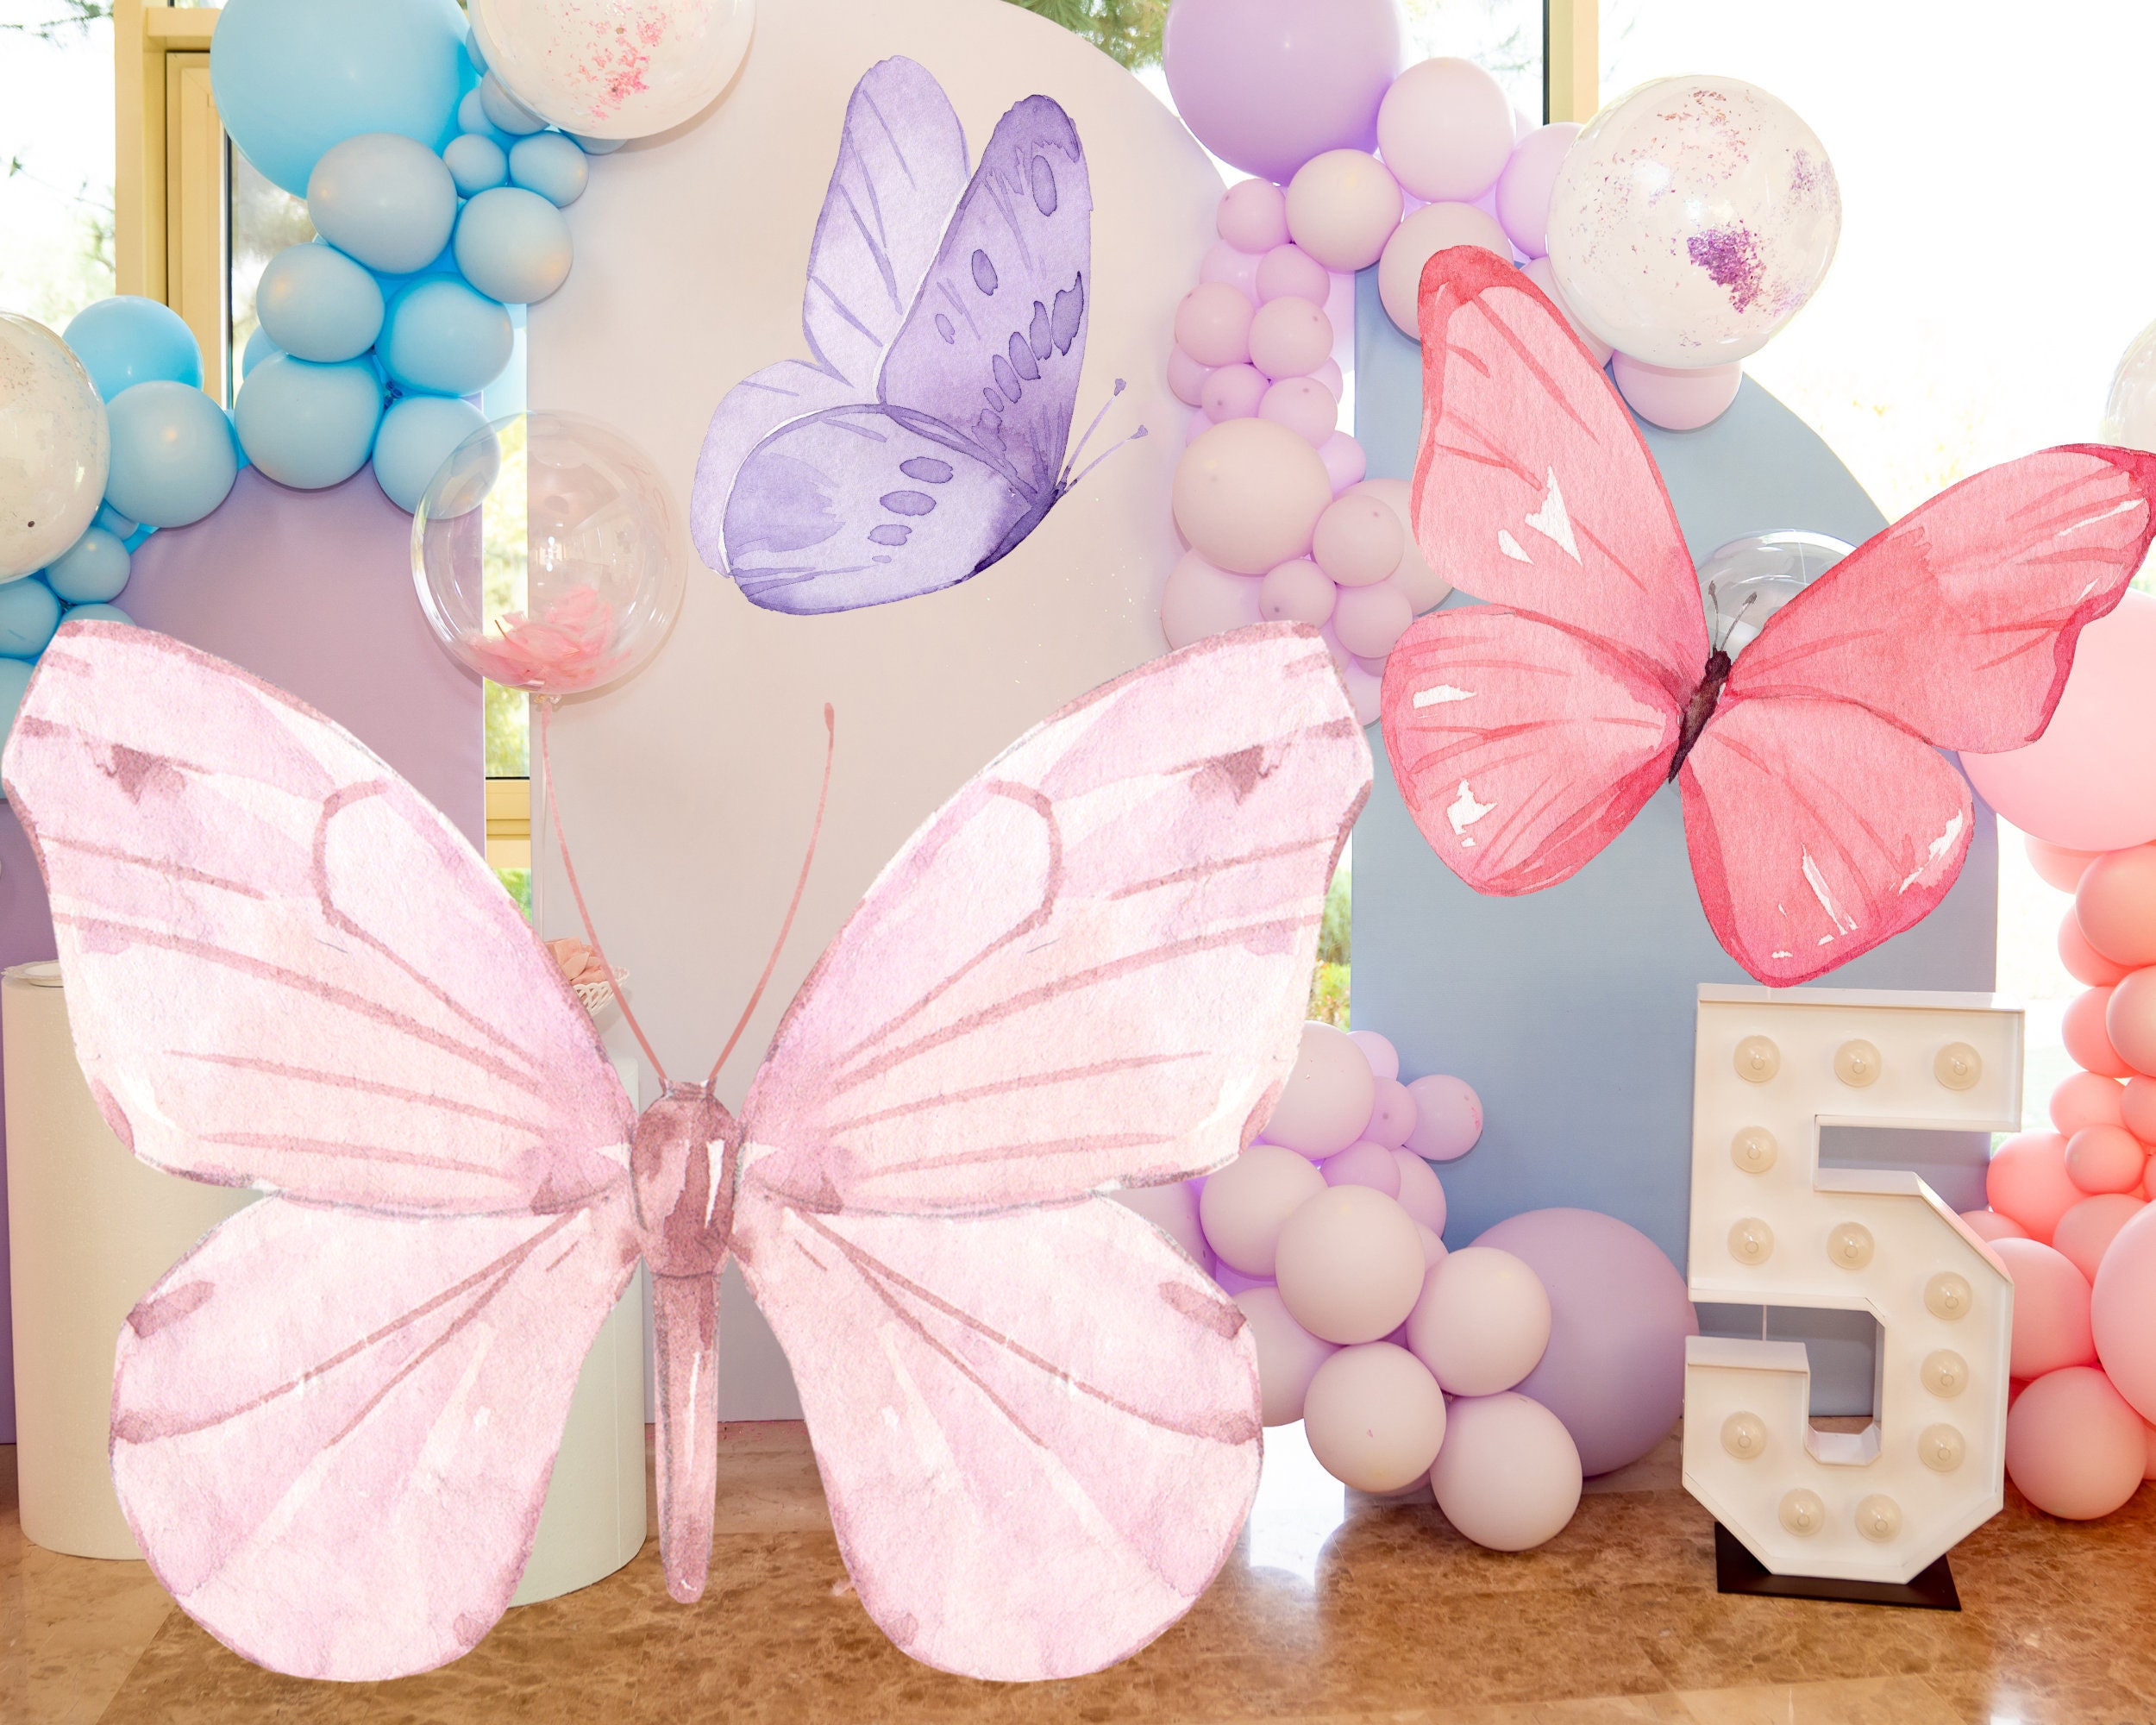 Blustrio 12 Pcs Large Butterfly Birthday Party Decorations, 3d Butterfly  Wall Decor, Mariposas Decorativas Para Fiesta For Girls Butterfly Baby  Shower